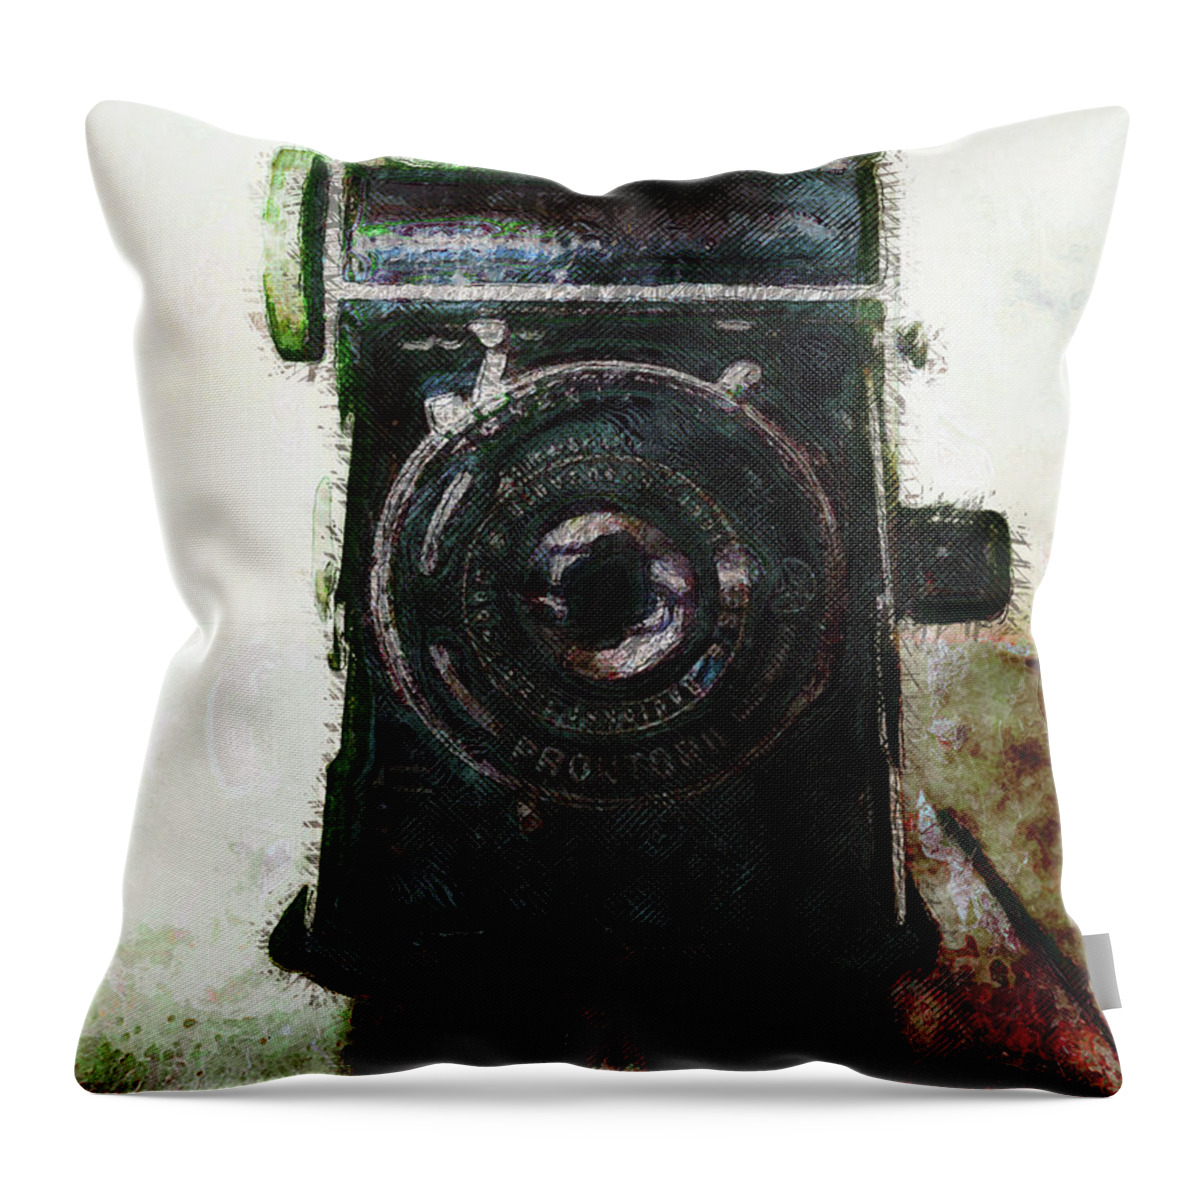 Photography Throw Pillow featuring the photograph Vintage Camera by Phil Perkins